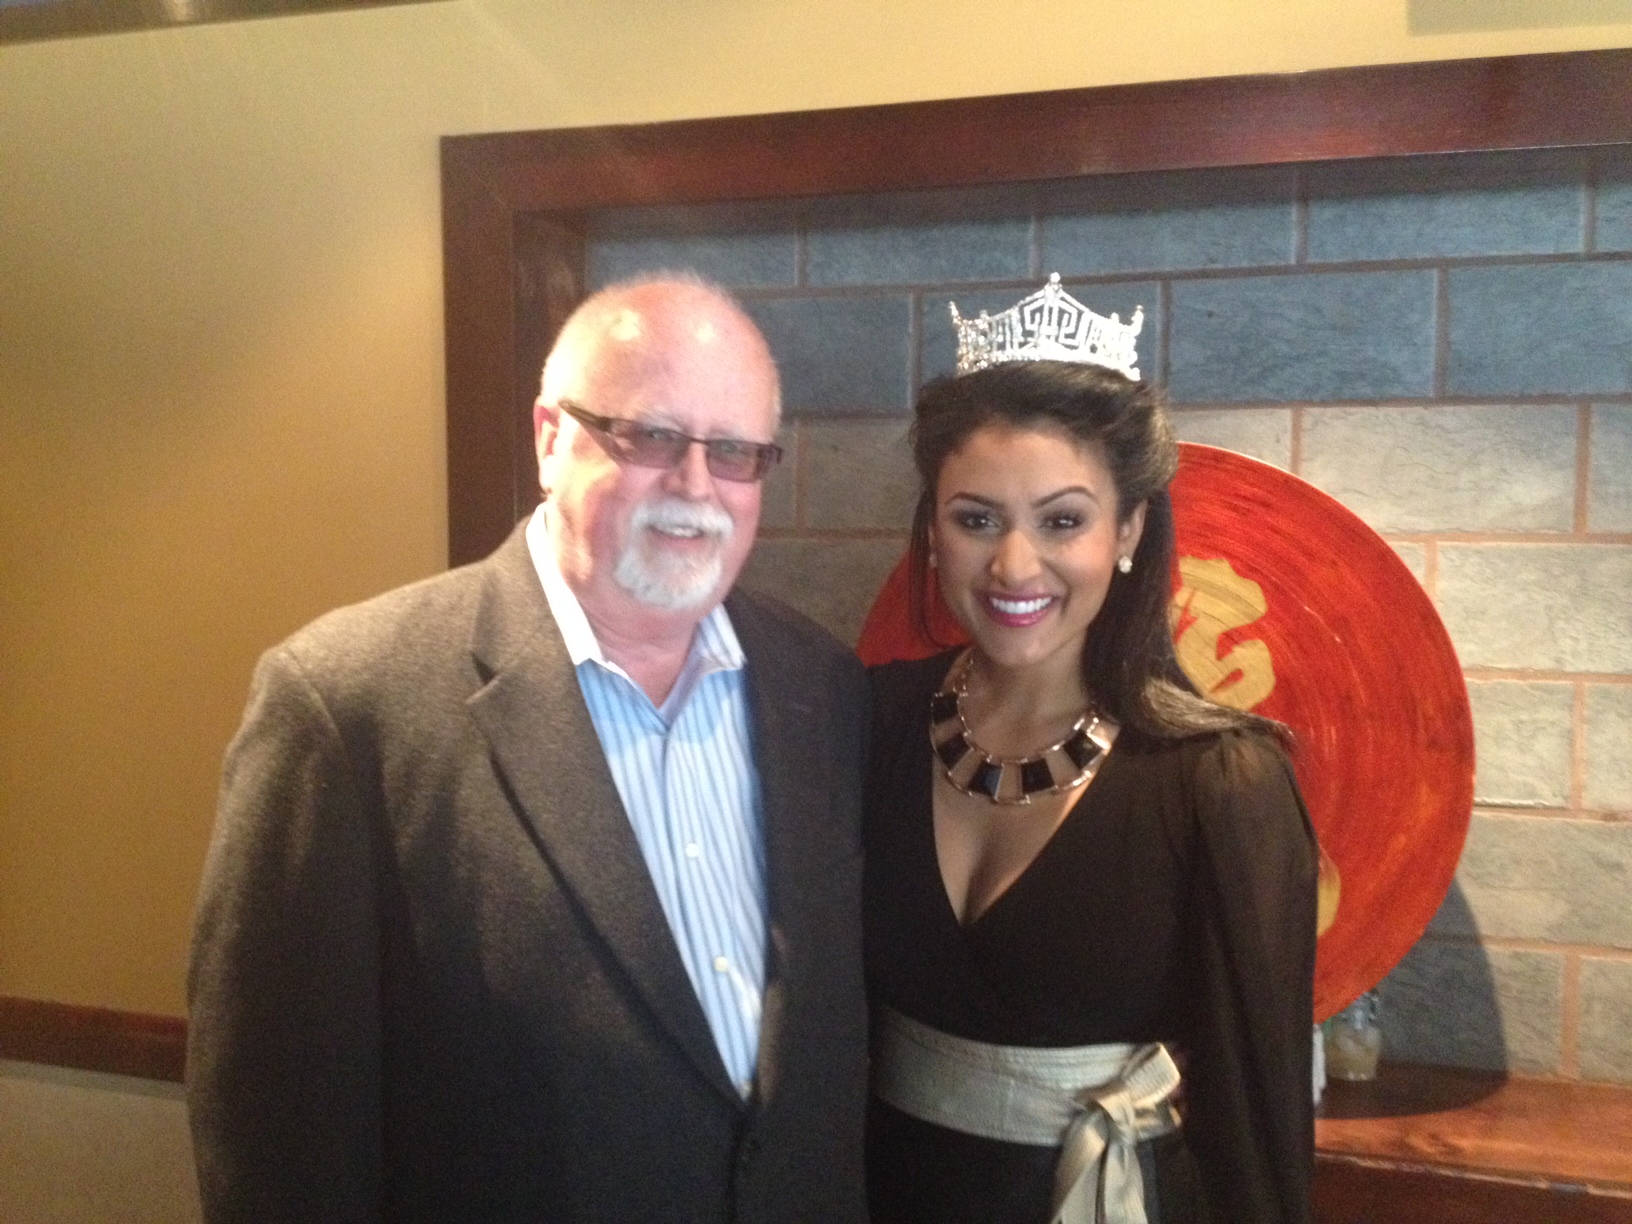 Crowns, Congrats and a Little Crooning When Miss America Comes to Town